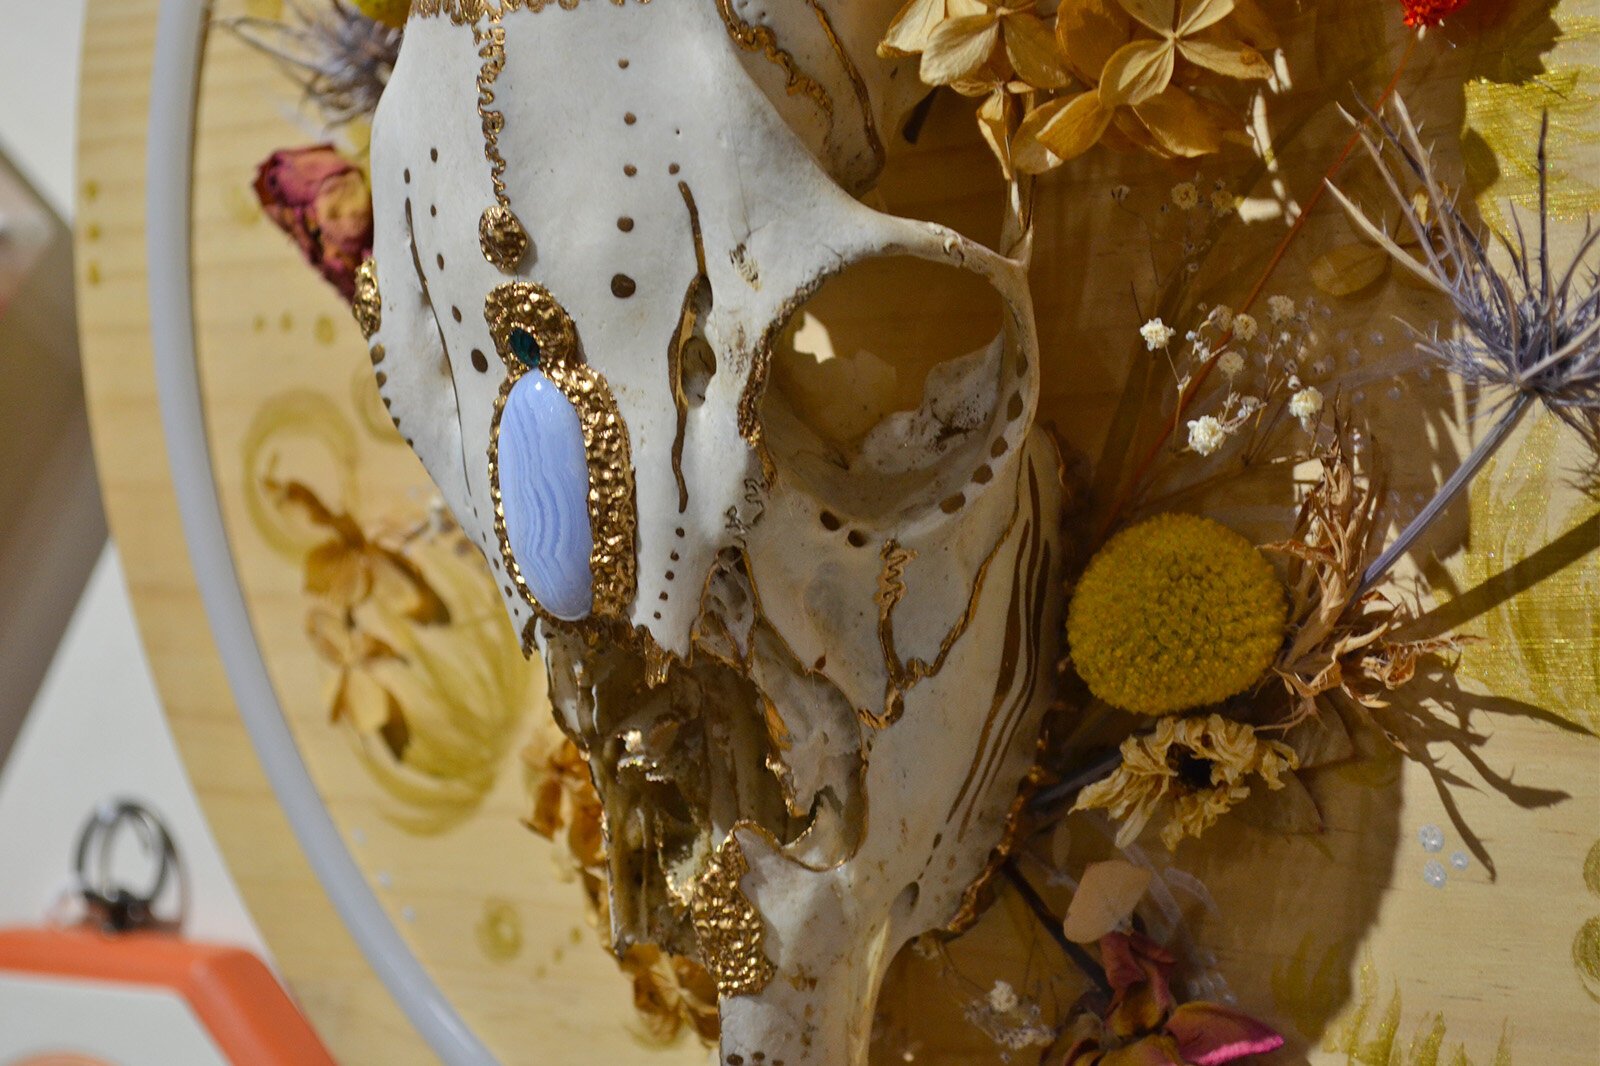 TSC founder Val Birch also had artwork on display, including this painted animal skull from the Other Curiosities shop.